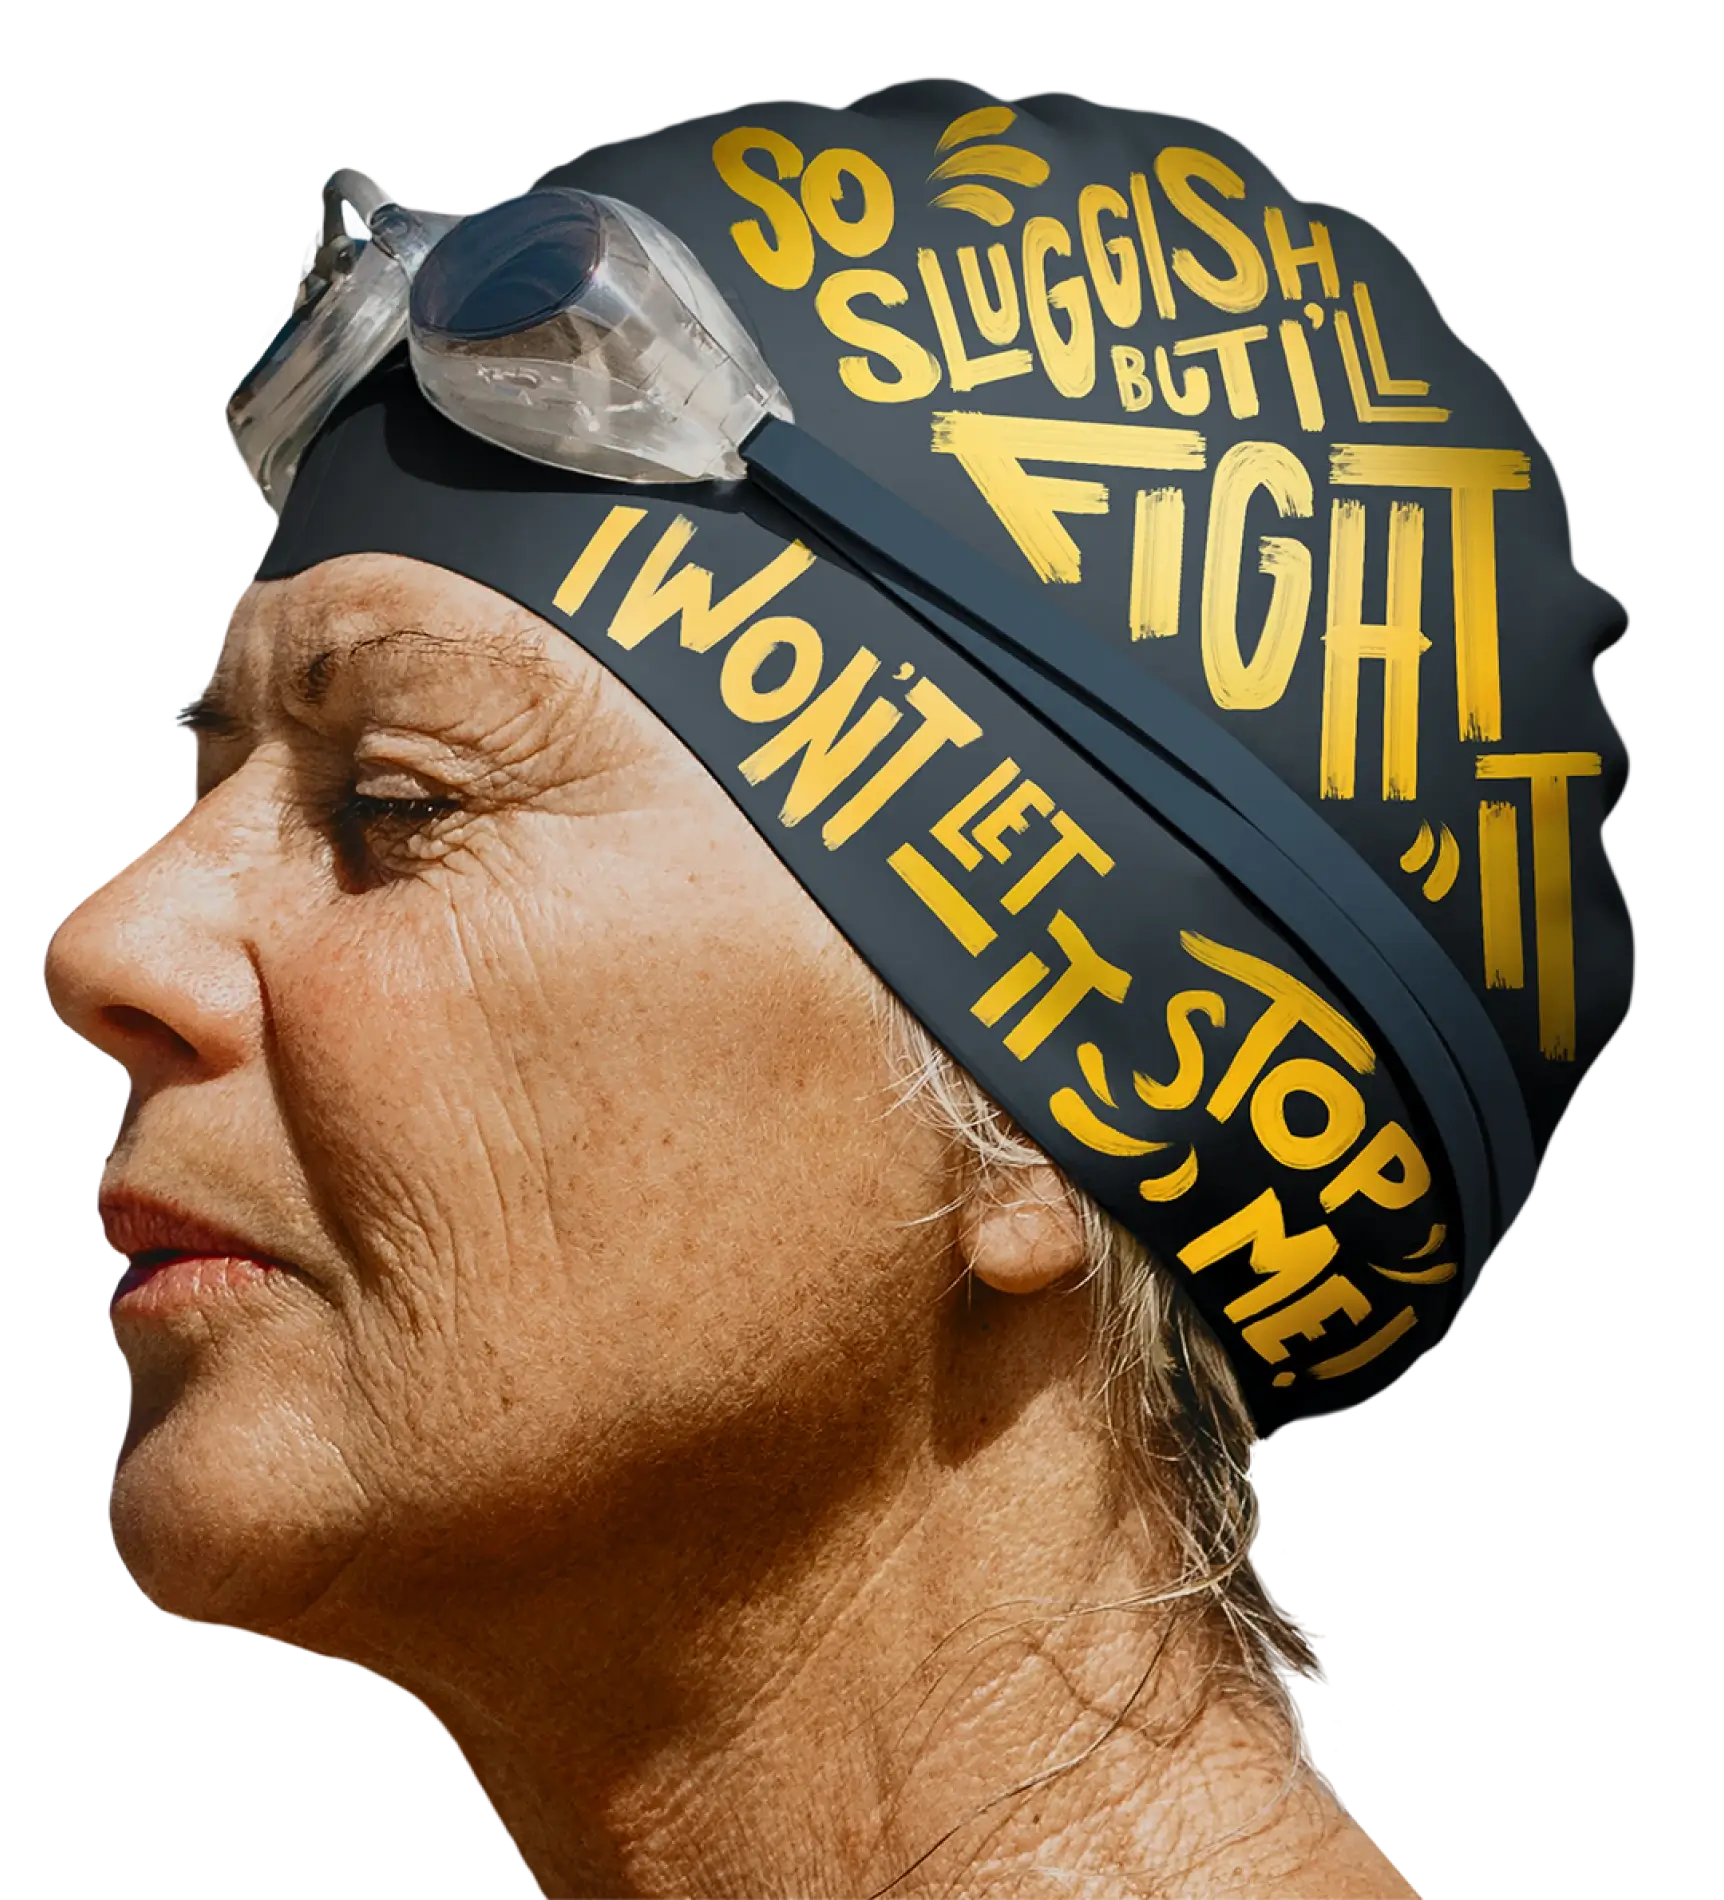 Side profile of a woman wearing a swim cap. Her eyes are closed. The words on the side of her swim cap are "So sluggish but I'll fight it. I won't let it stop me.